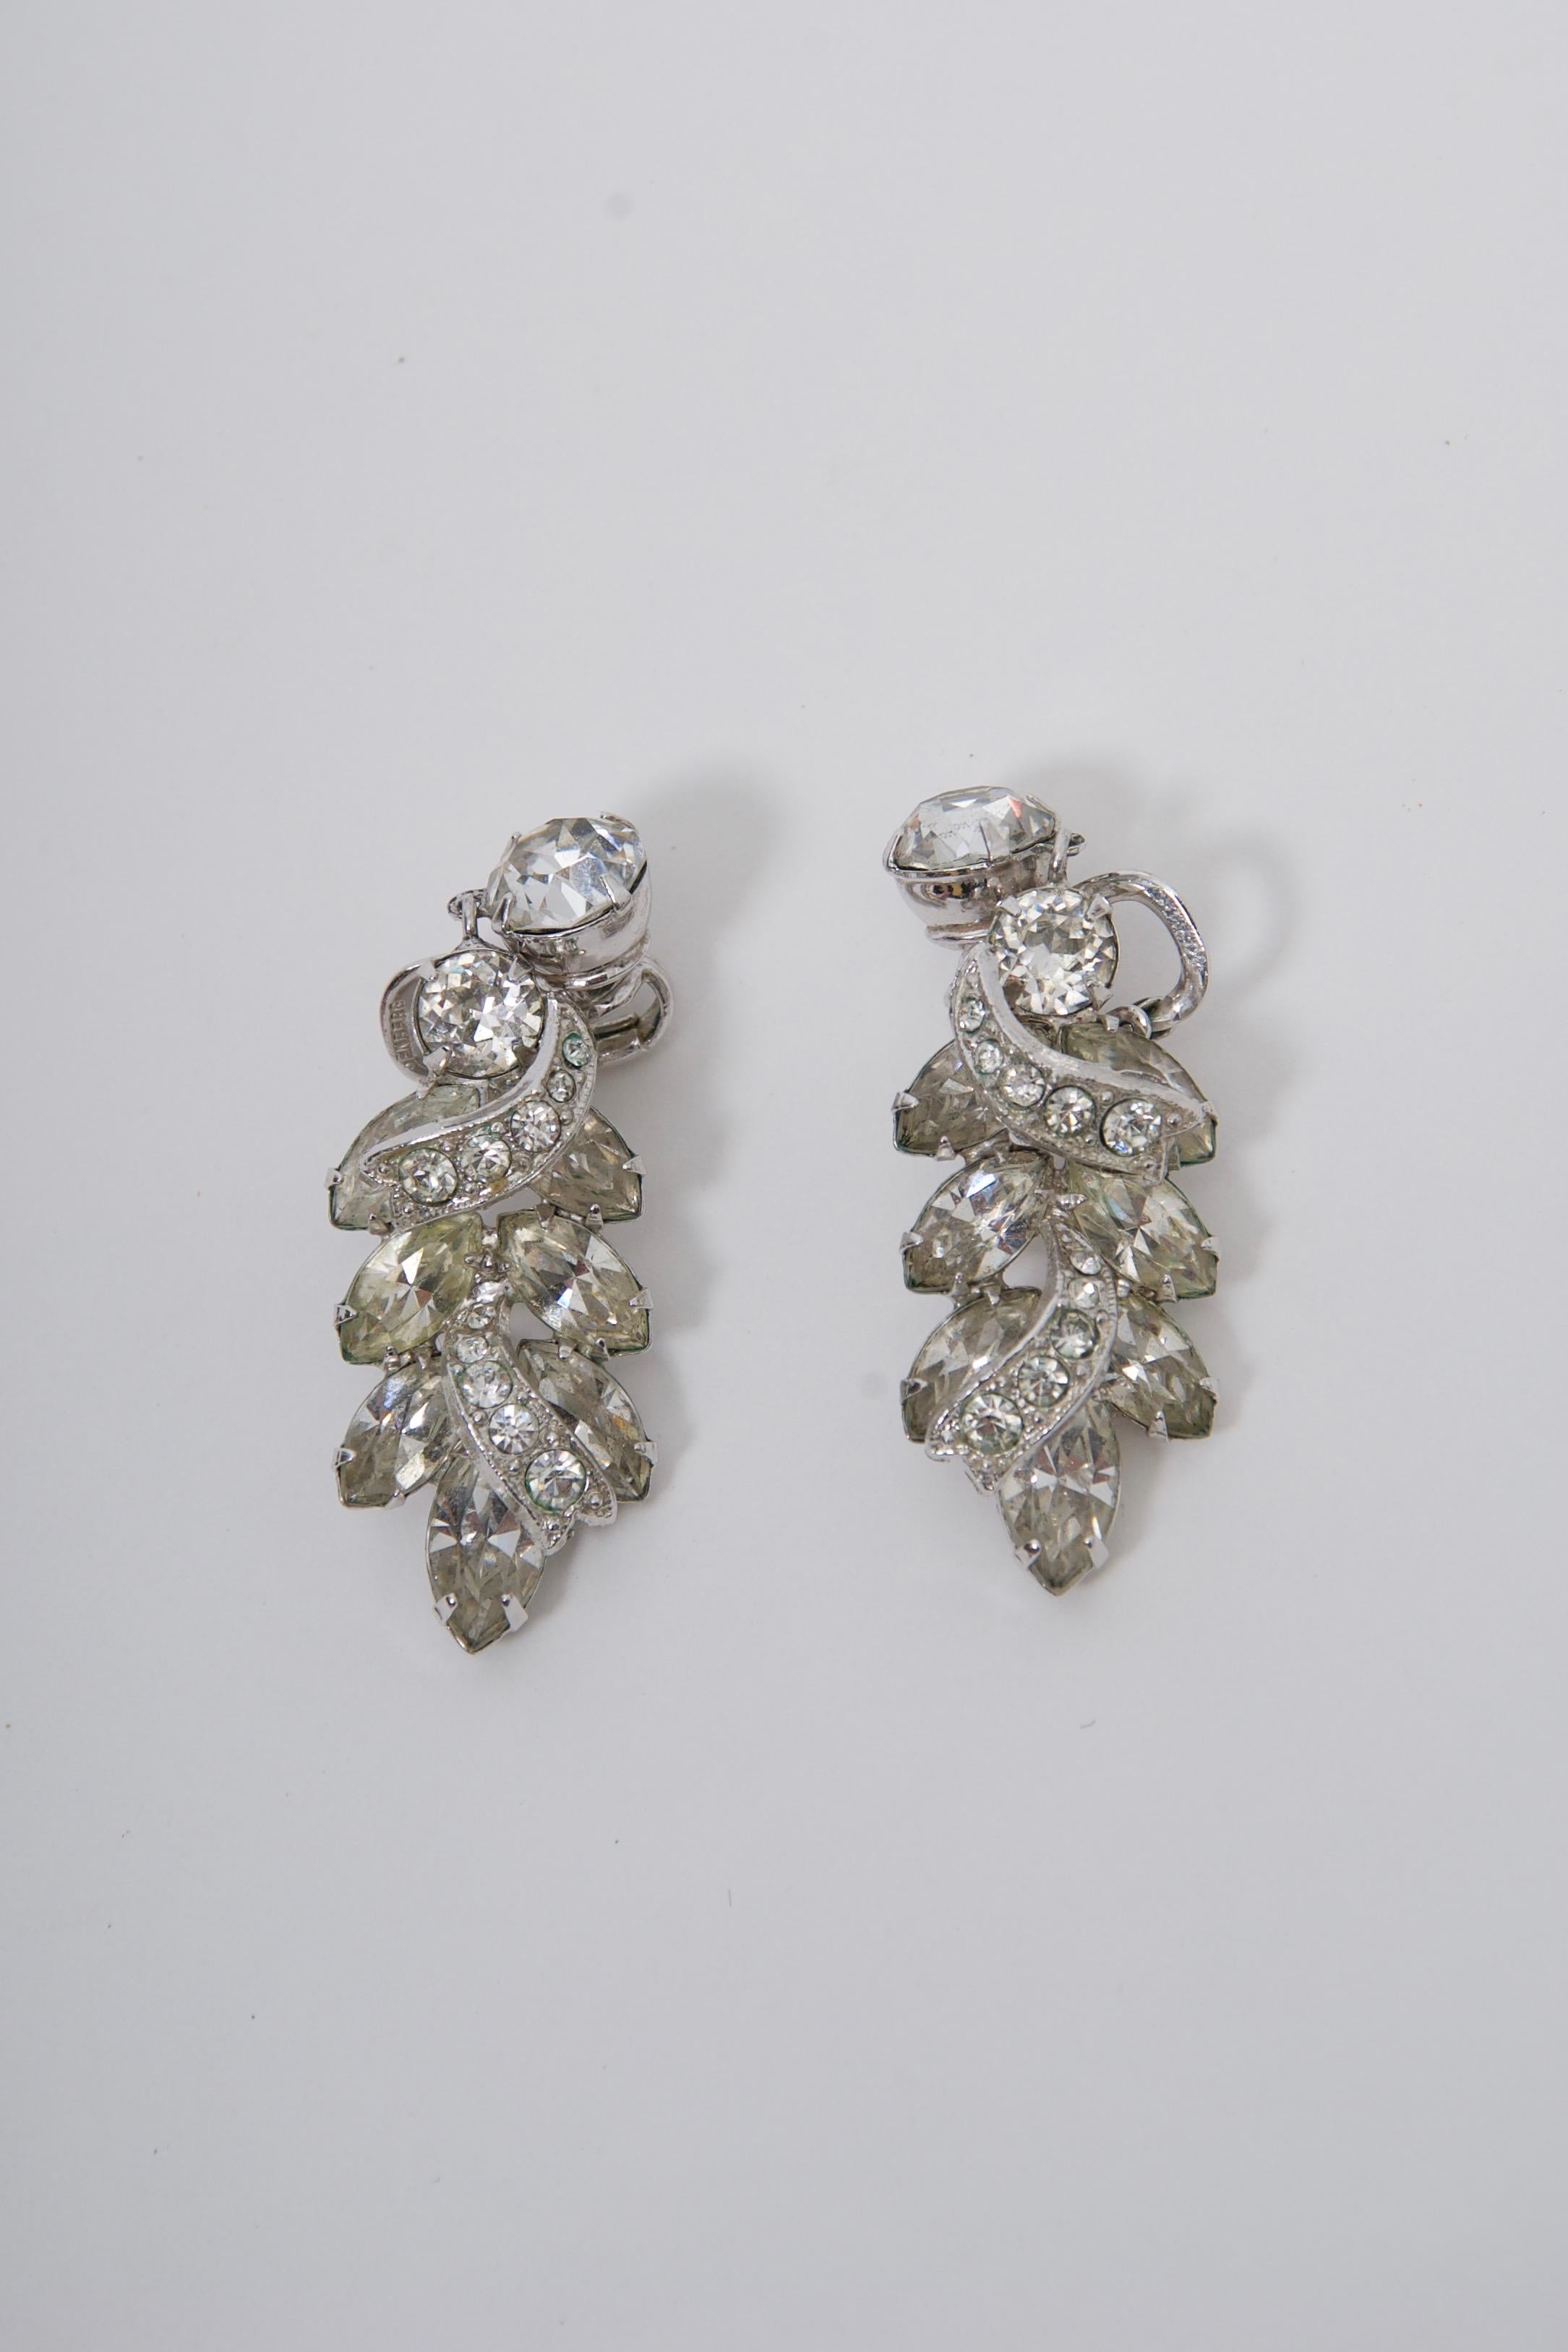 Rhinestone vintage drop earrings by Eisenberg composed of various-sized round and marquise stones in an intricate setting. Comfortable clip-on backings.